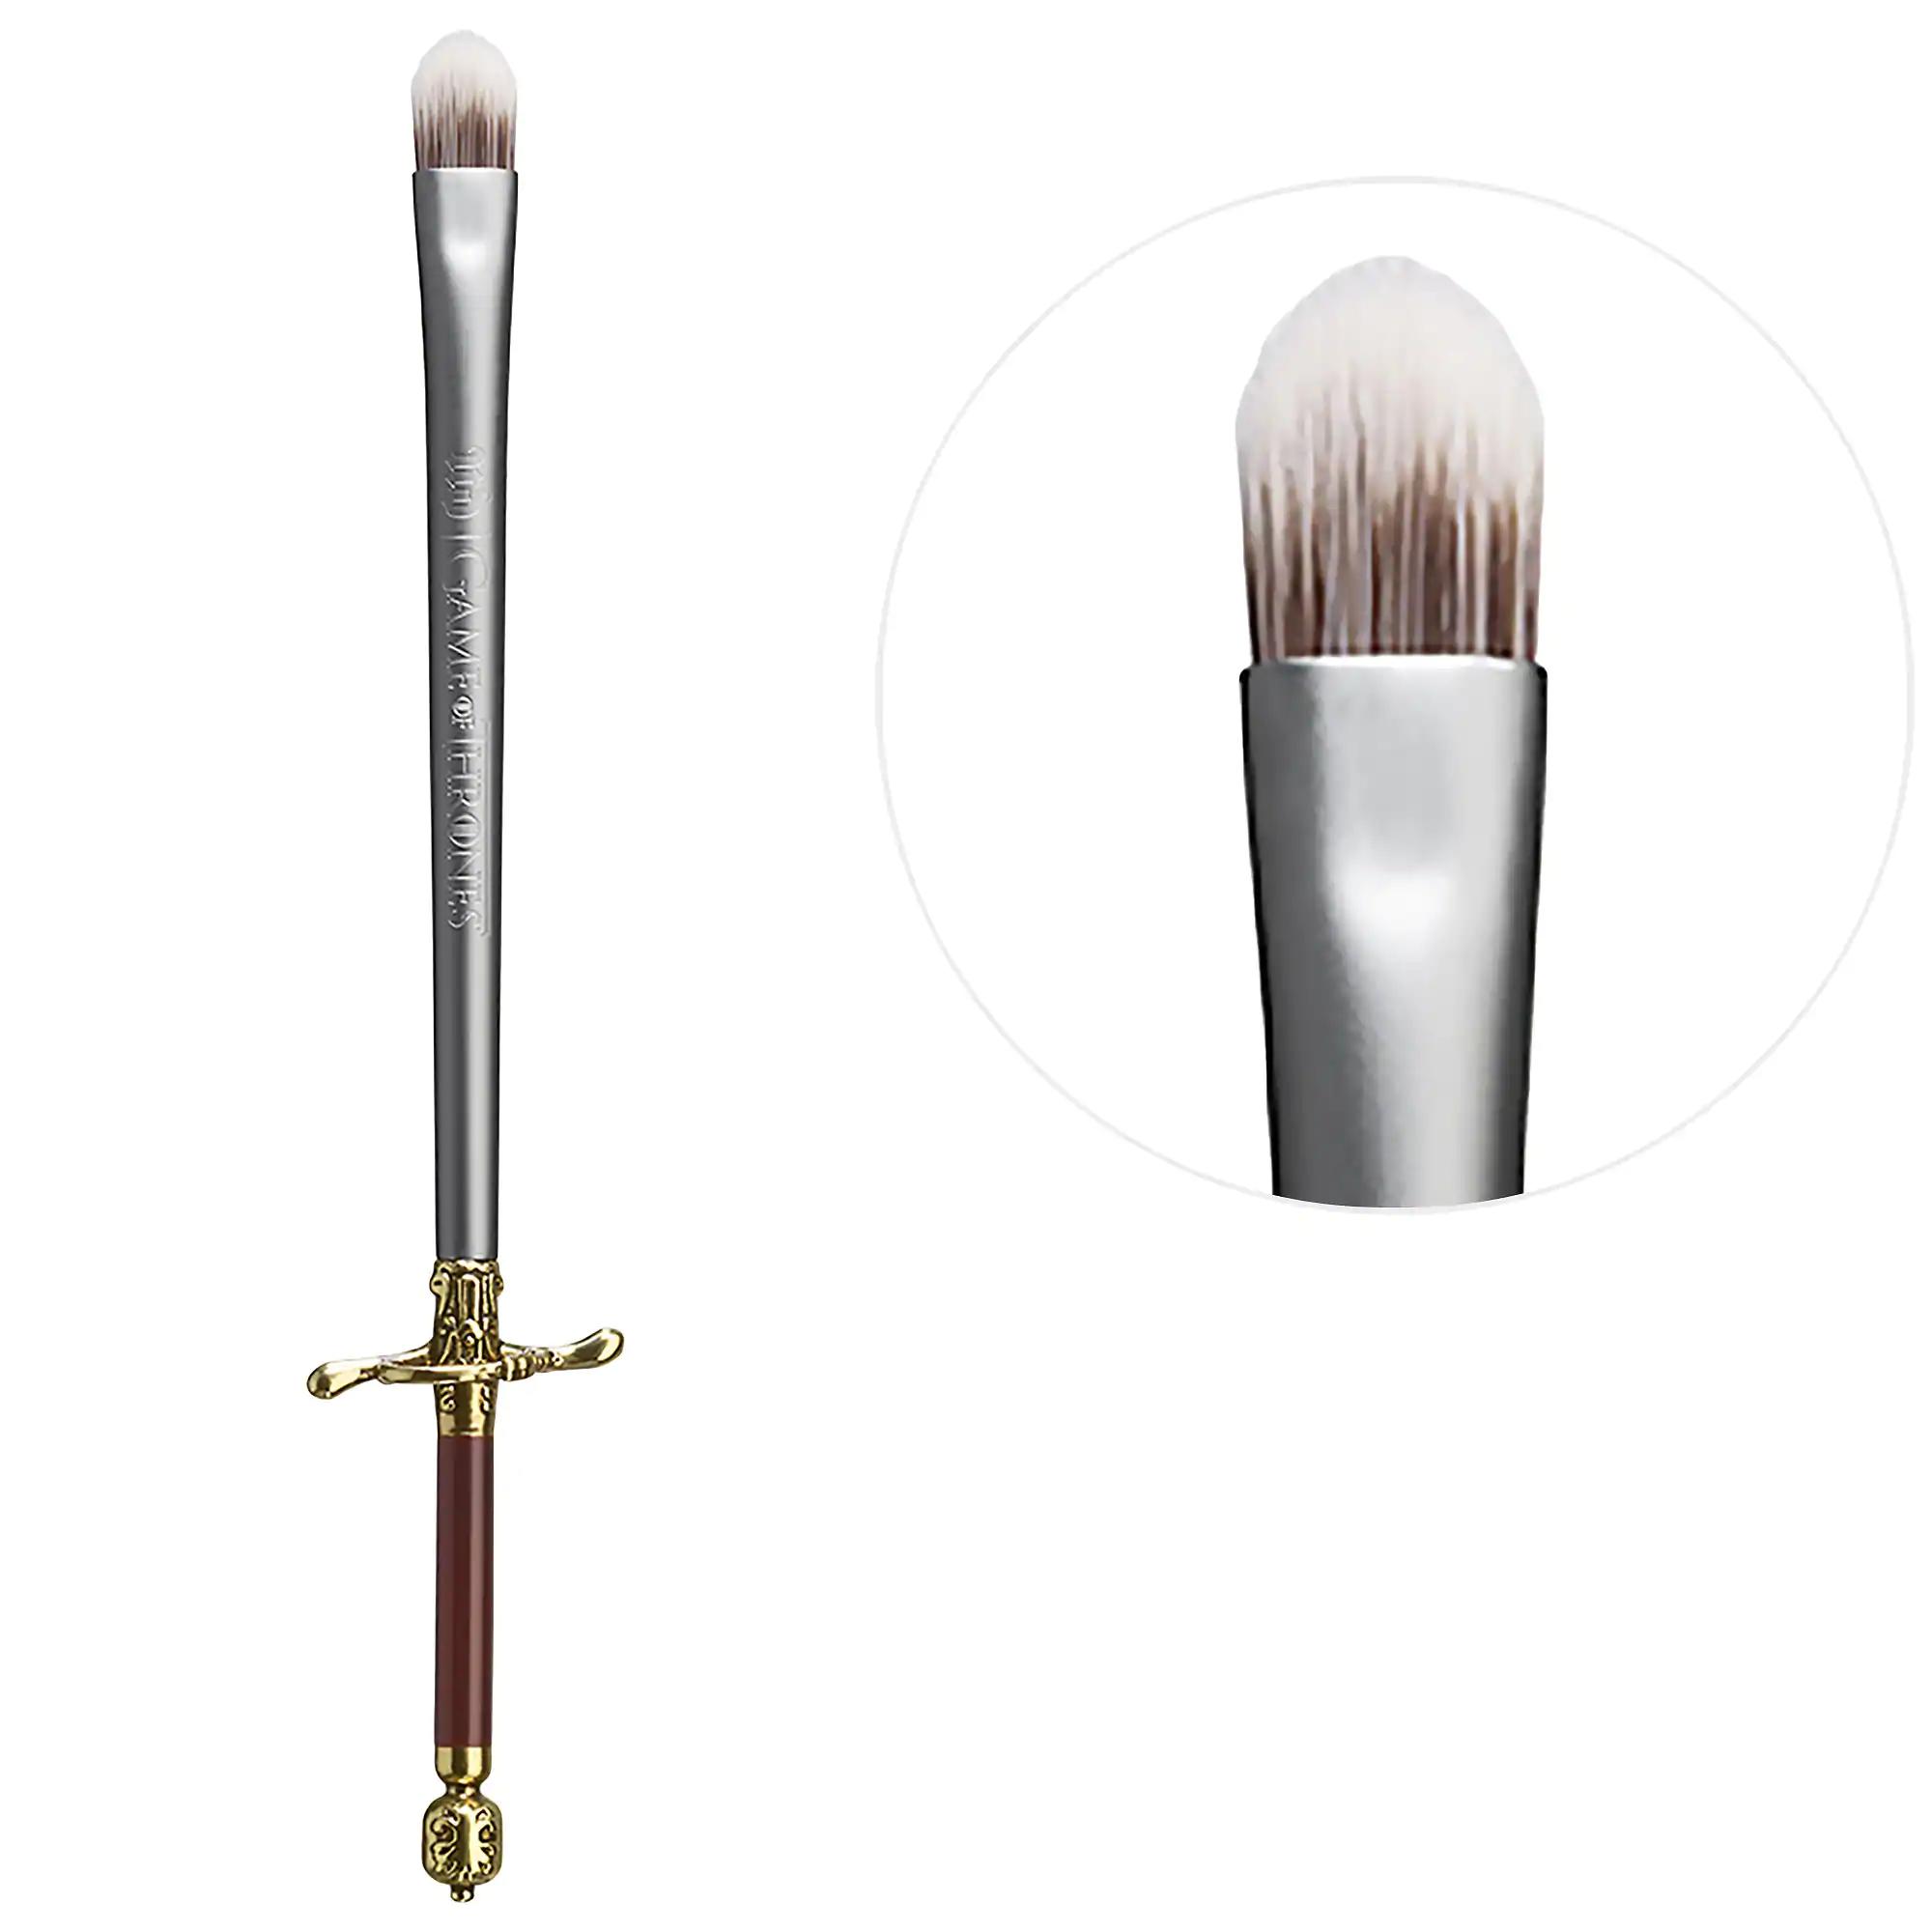 Urban Decay Game Of Thrones Collection Arya Starks Needle Brush